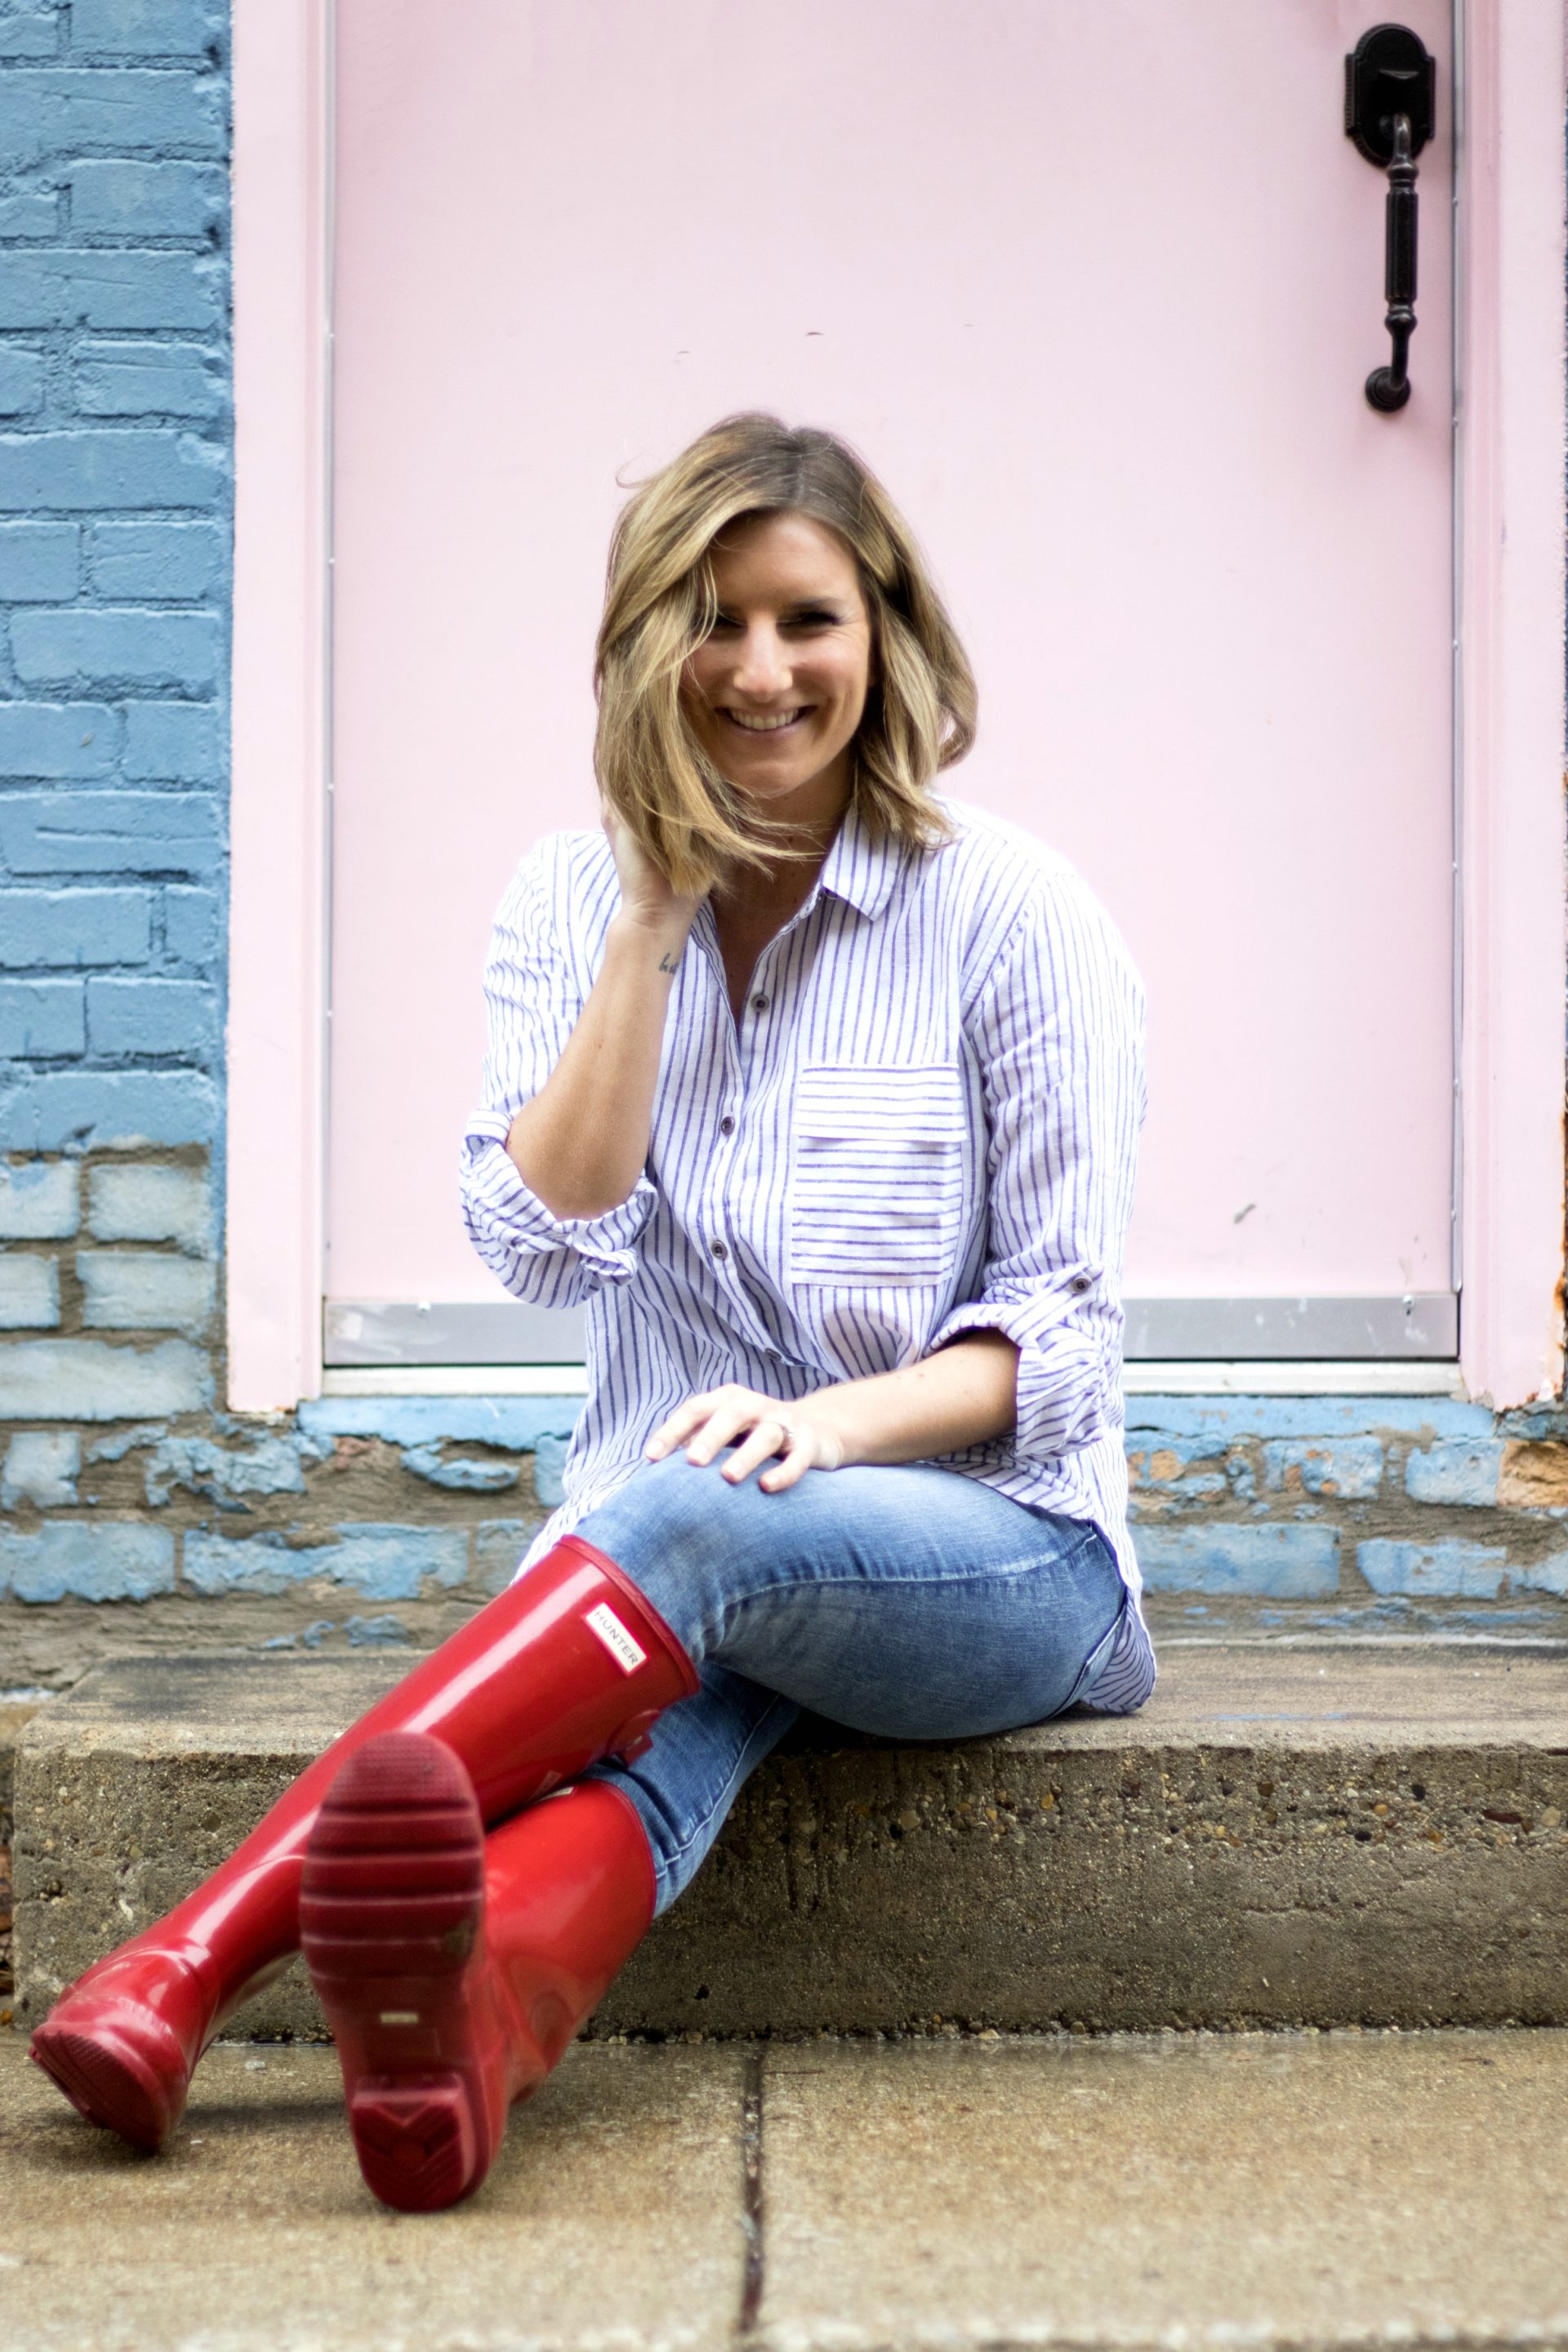 Outfit: The Perfect Rain Boots